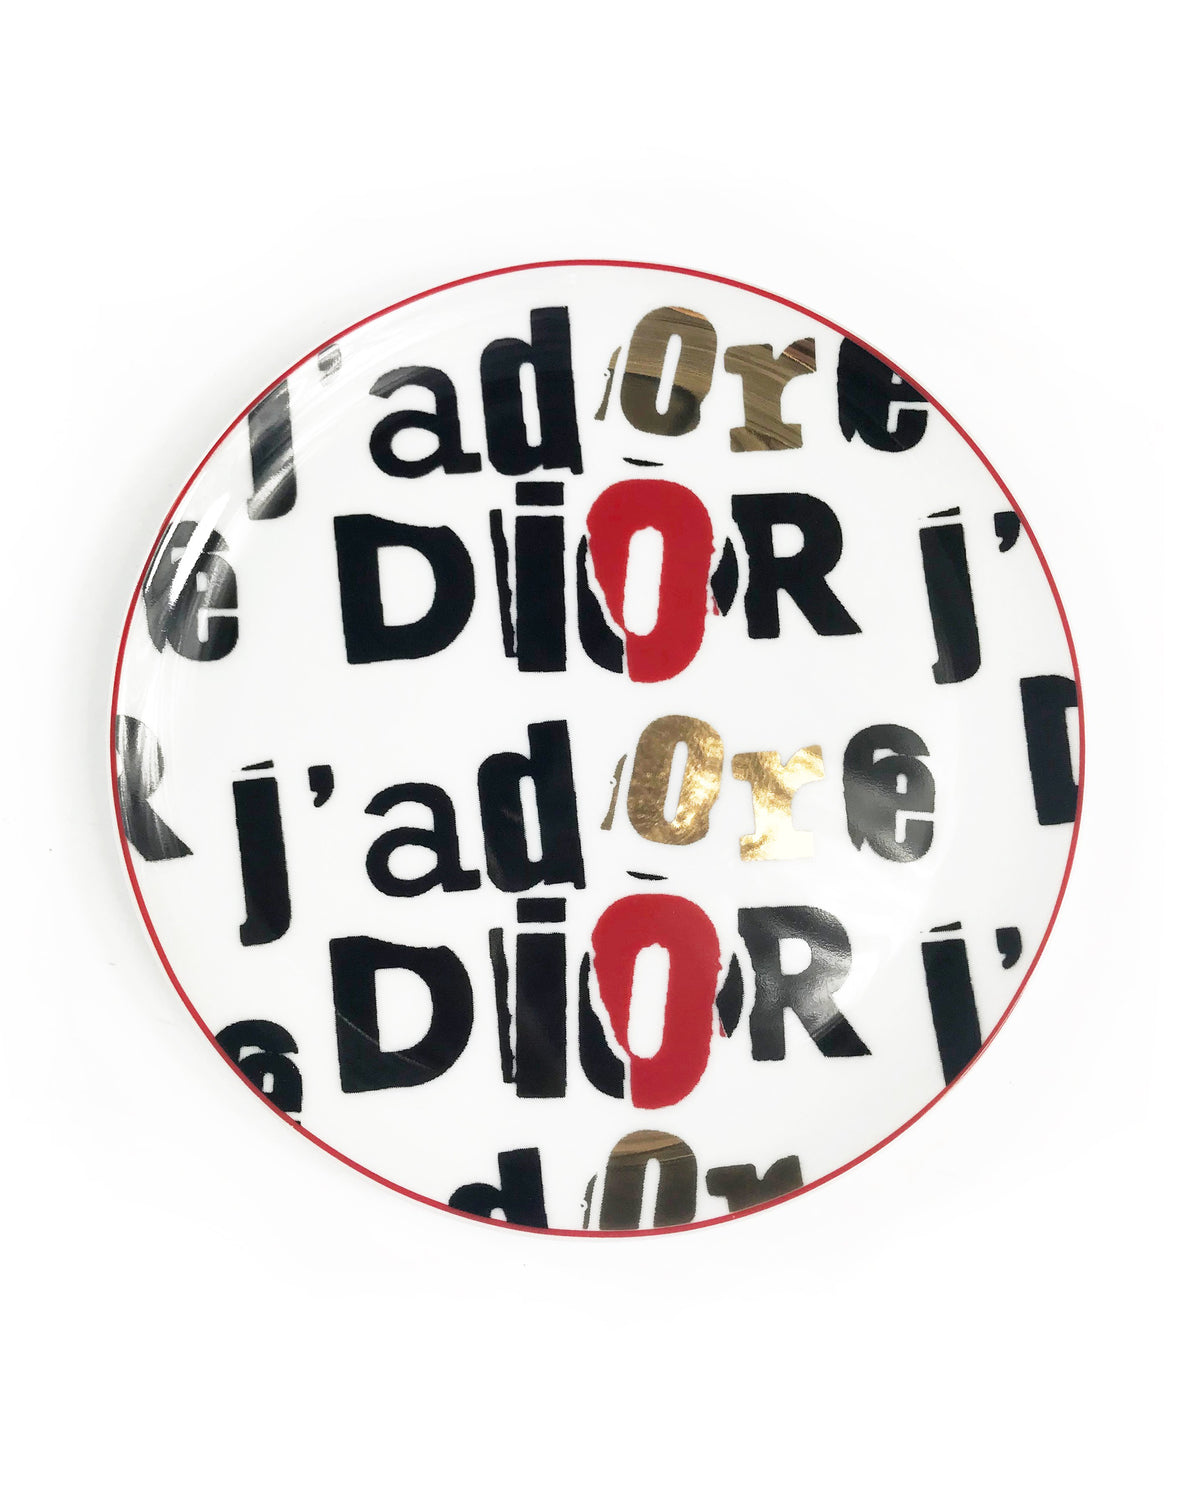 FRUIT Vintage Christian Dior J'adore Dior porcelain plate set. They feature an iconic newspaper cut-out version of the Jadore Dior logo monogram print in black, white and gold.